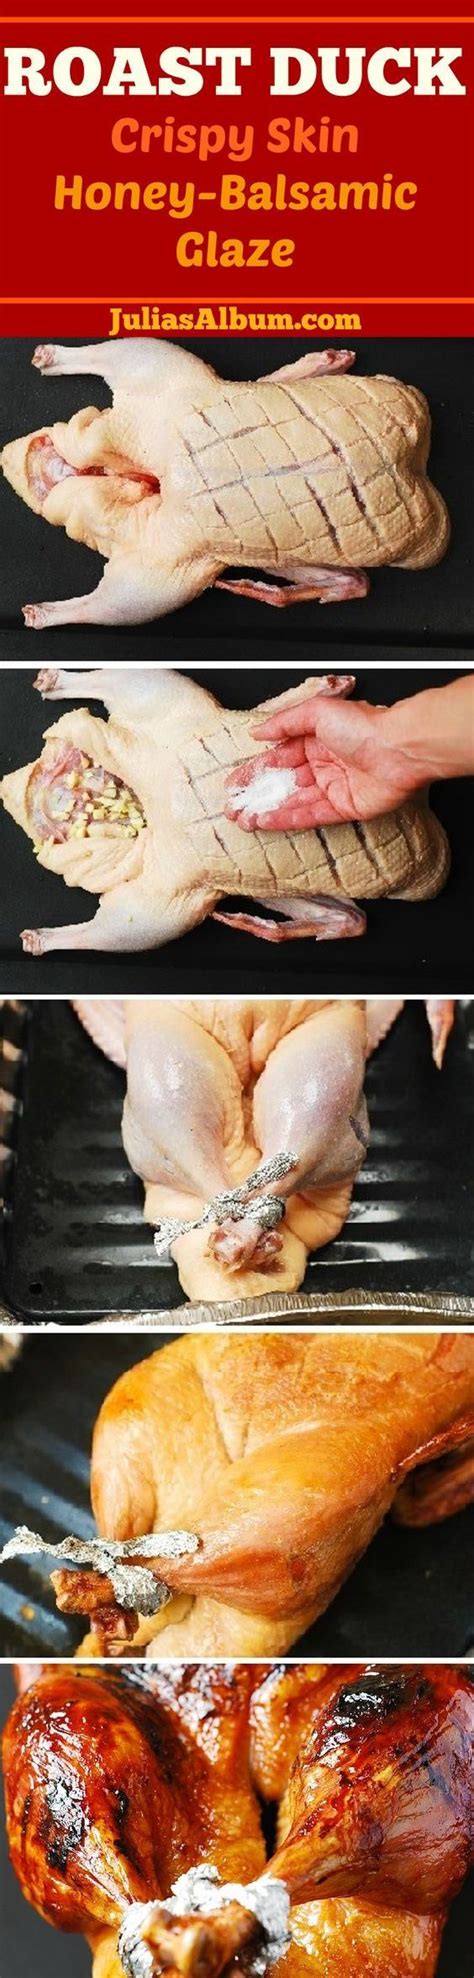 thanksgiving roast duck step by step photos on how to